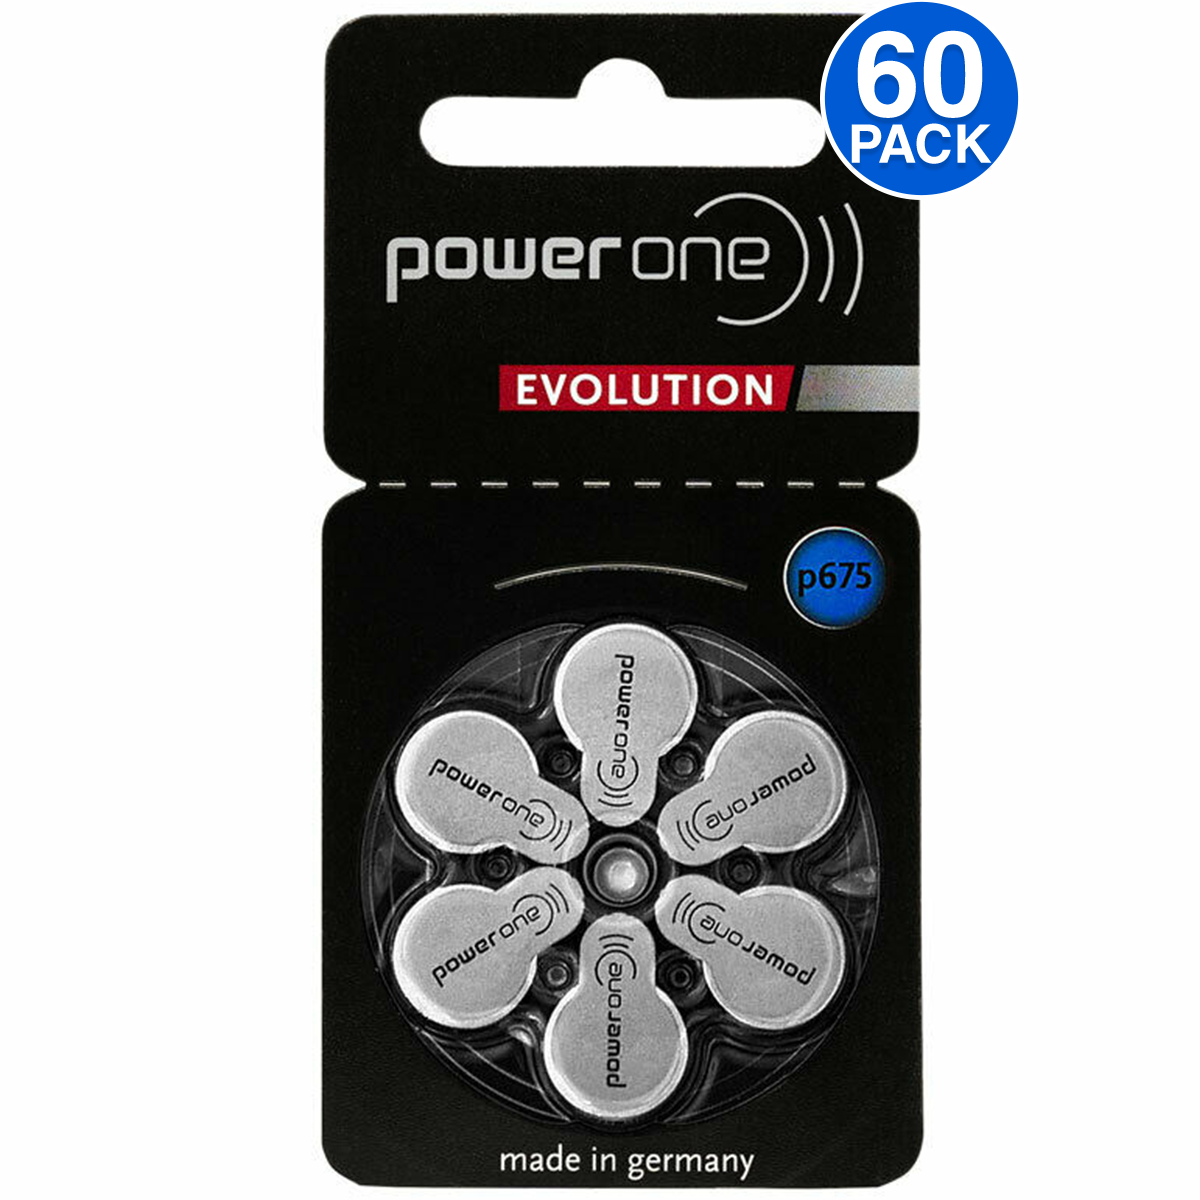 Power One Evolution Size 675 Hearing Aid Batteries (60 PCS)